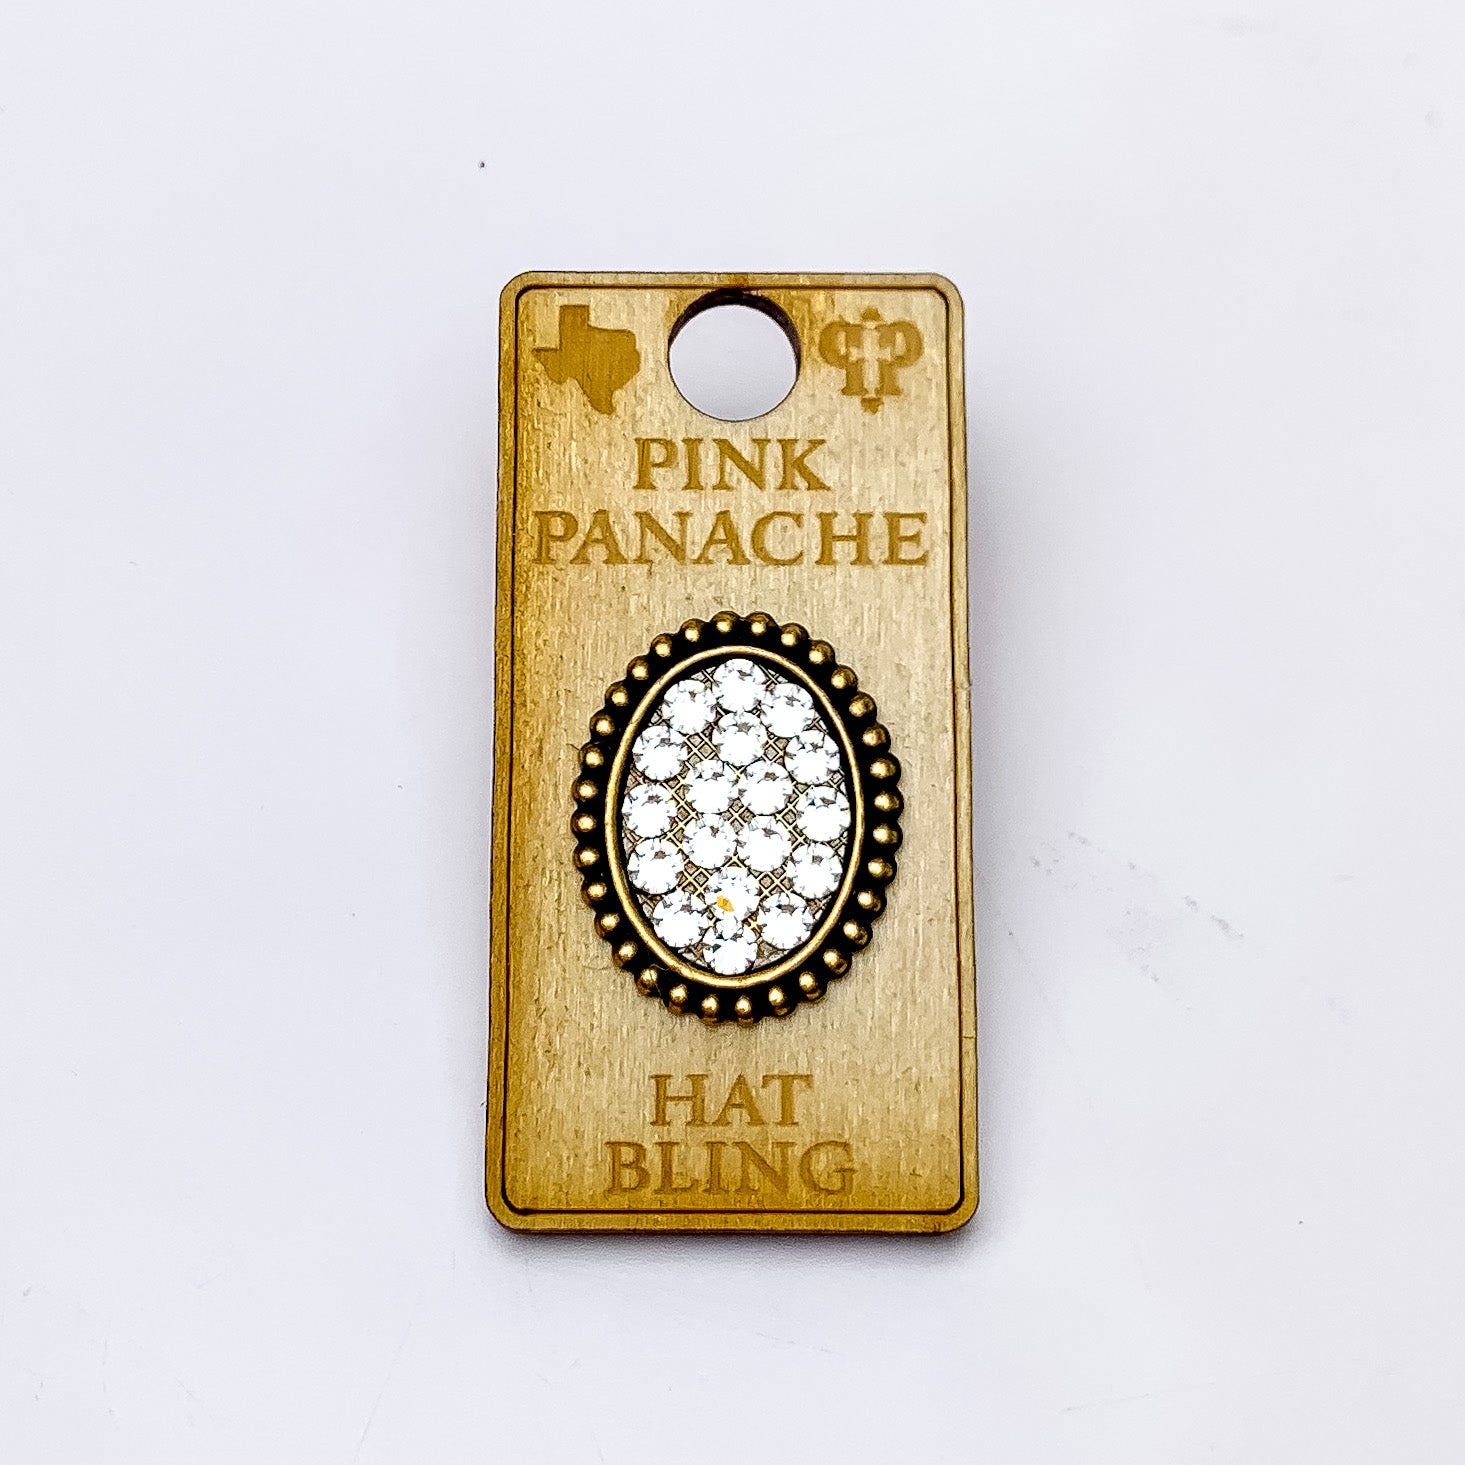 Pink Panache | Bronze Tone Oval Hat Pin with Clear Crystals. Pictured on a white background.